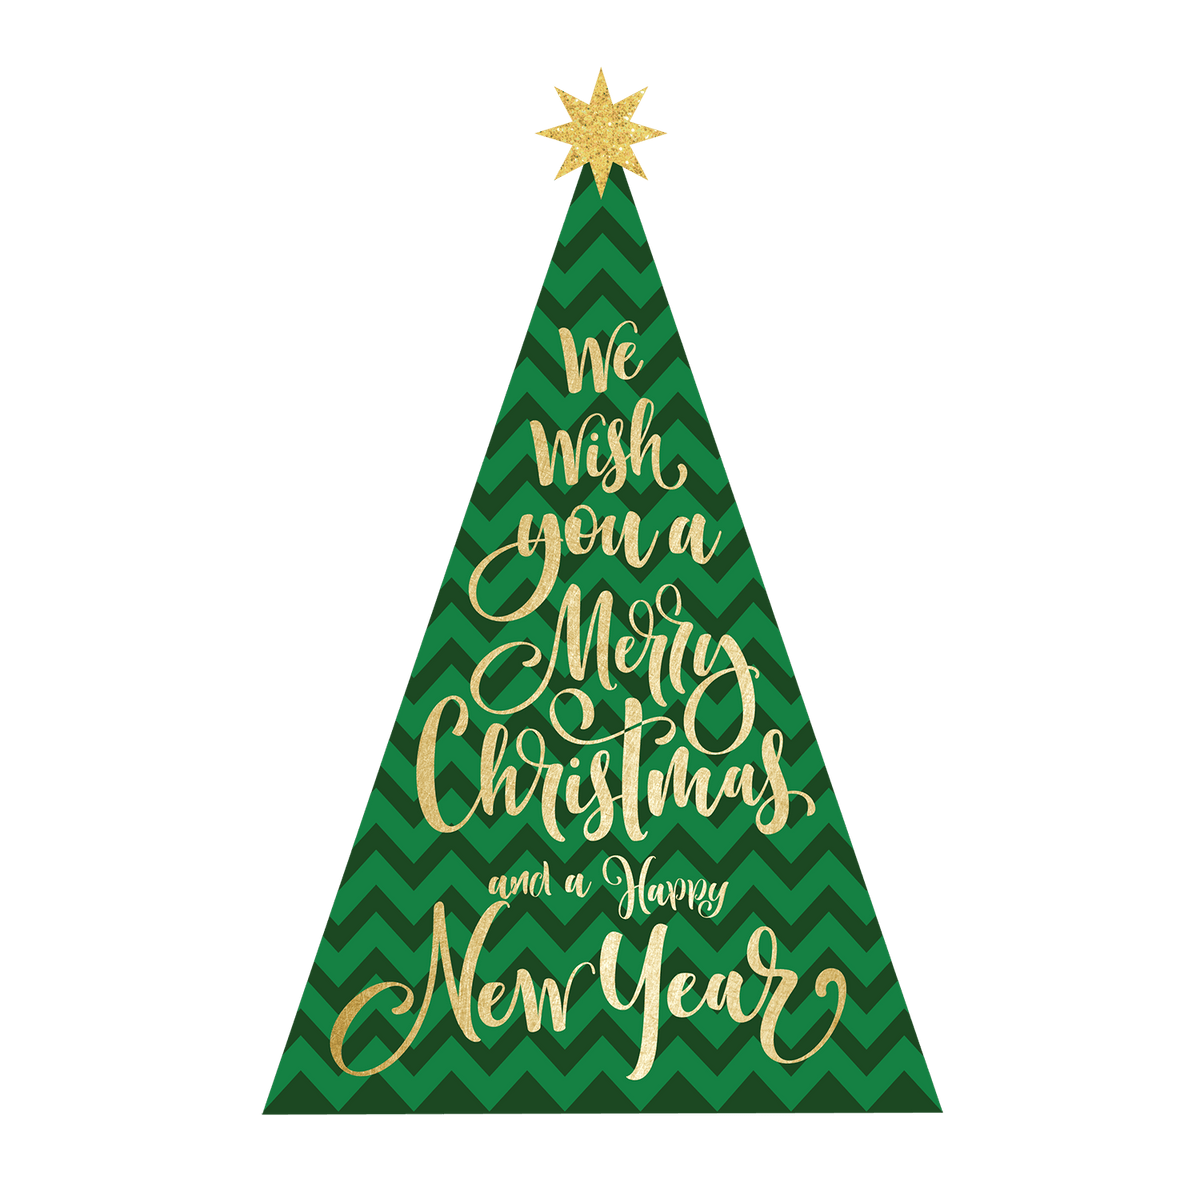 Graphic of a Cover-Alls Modern Christmas tree decal with the text "we wish you a merry christmas and a happy new year" in ornate lettering, topped with a gold star.